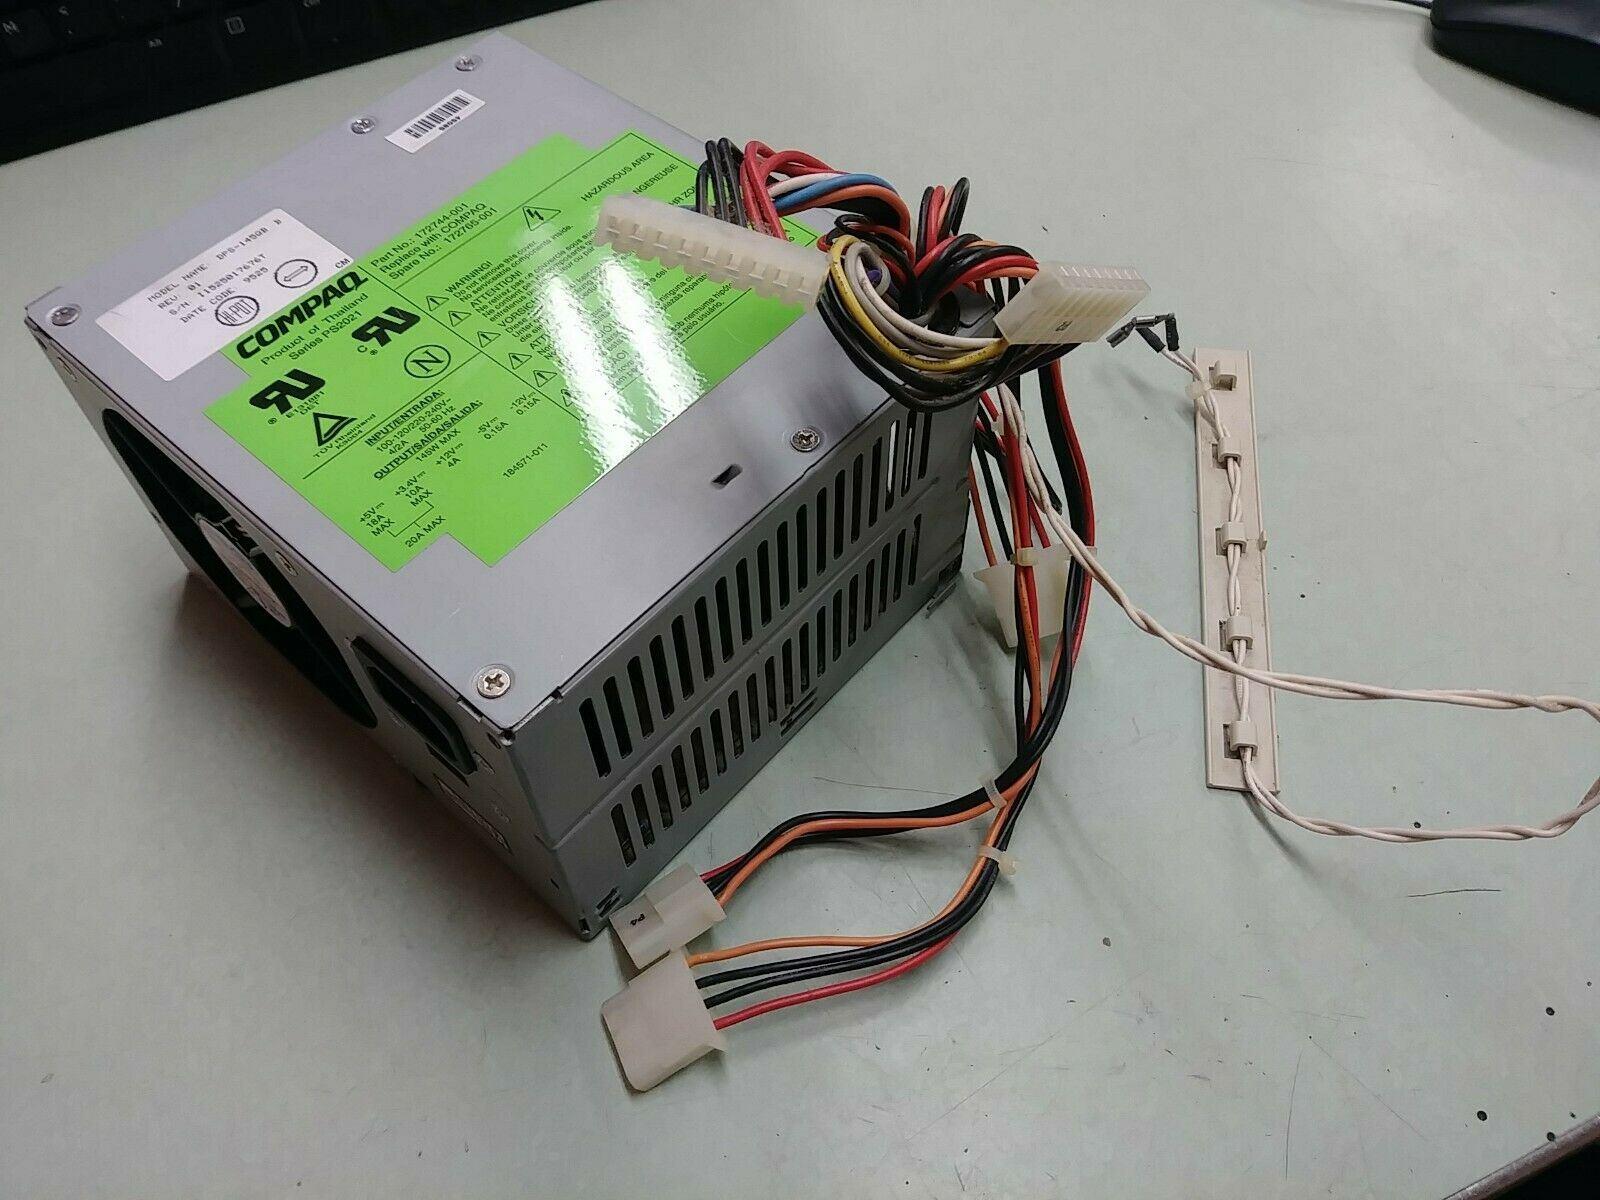 PS2021 172744 001 172765 001 power supply series ps2021 no longer supplied